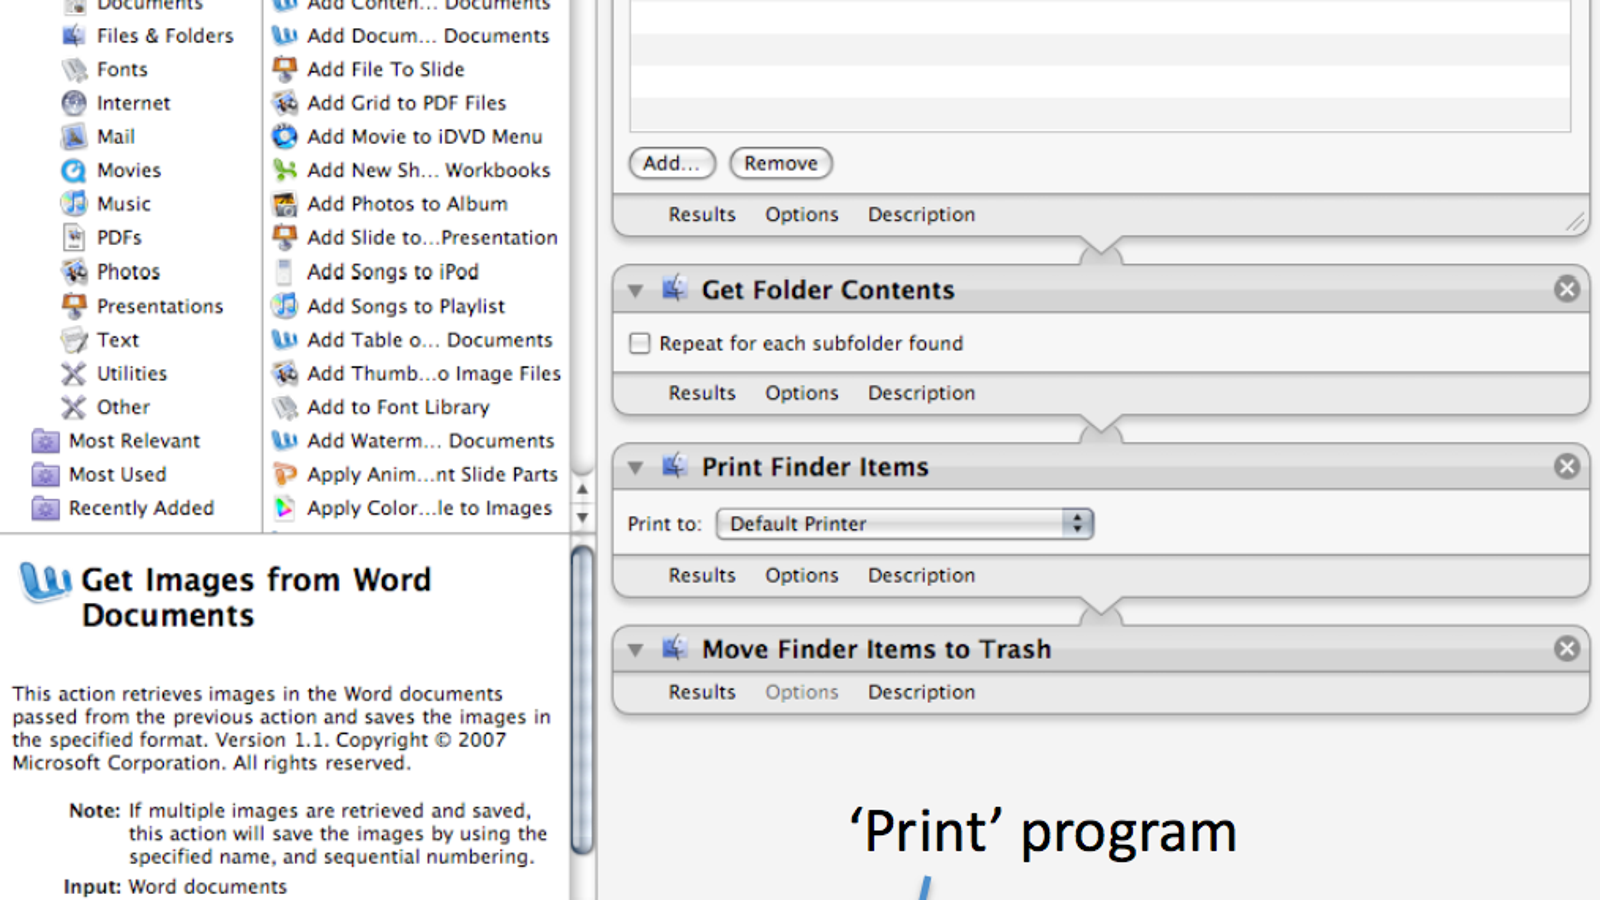 Use Automator To Combine Text Files Into One File